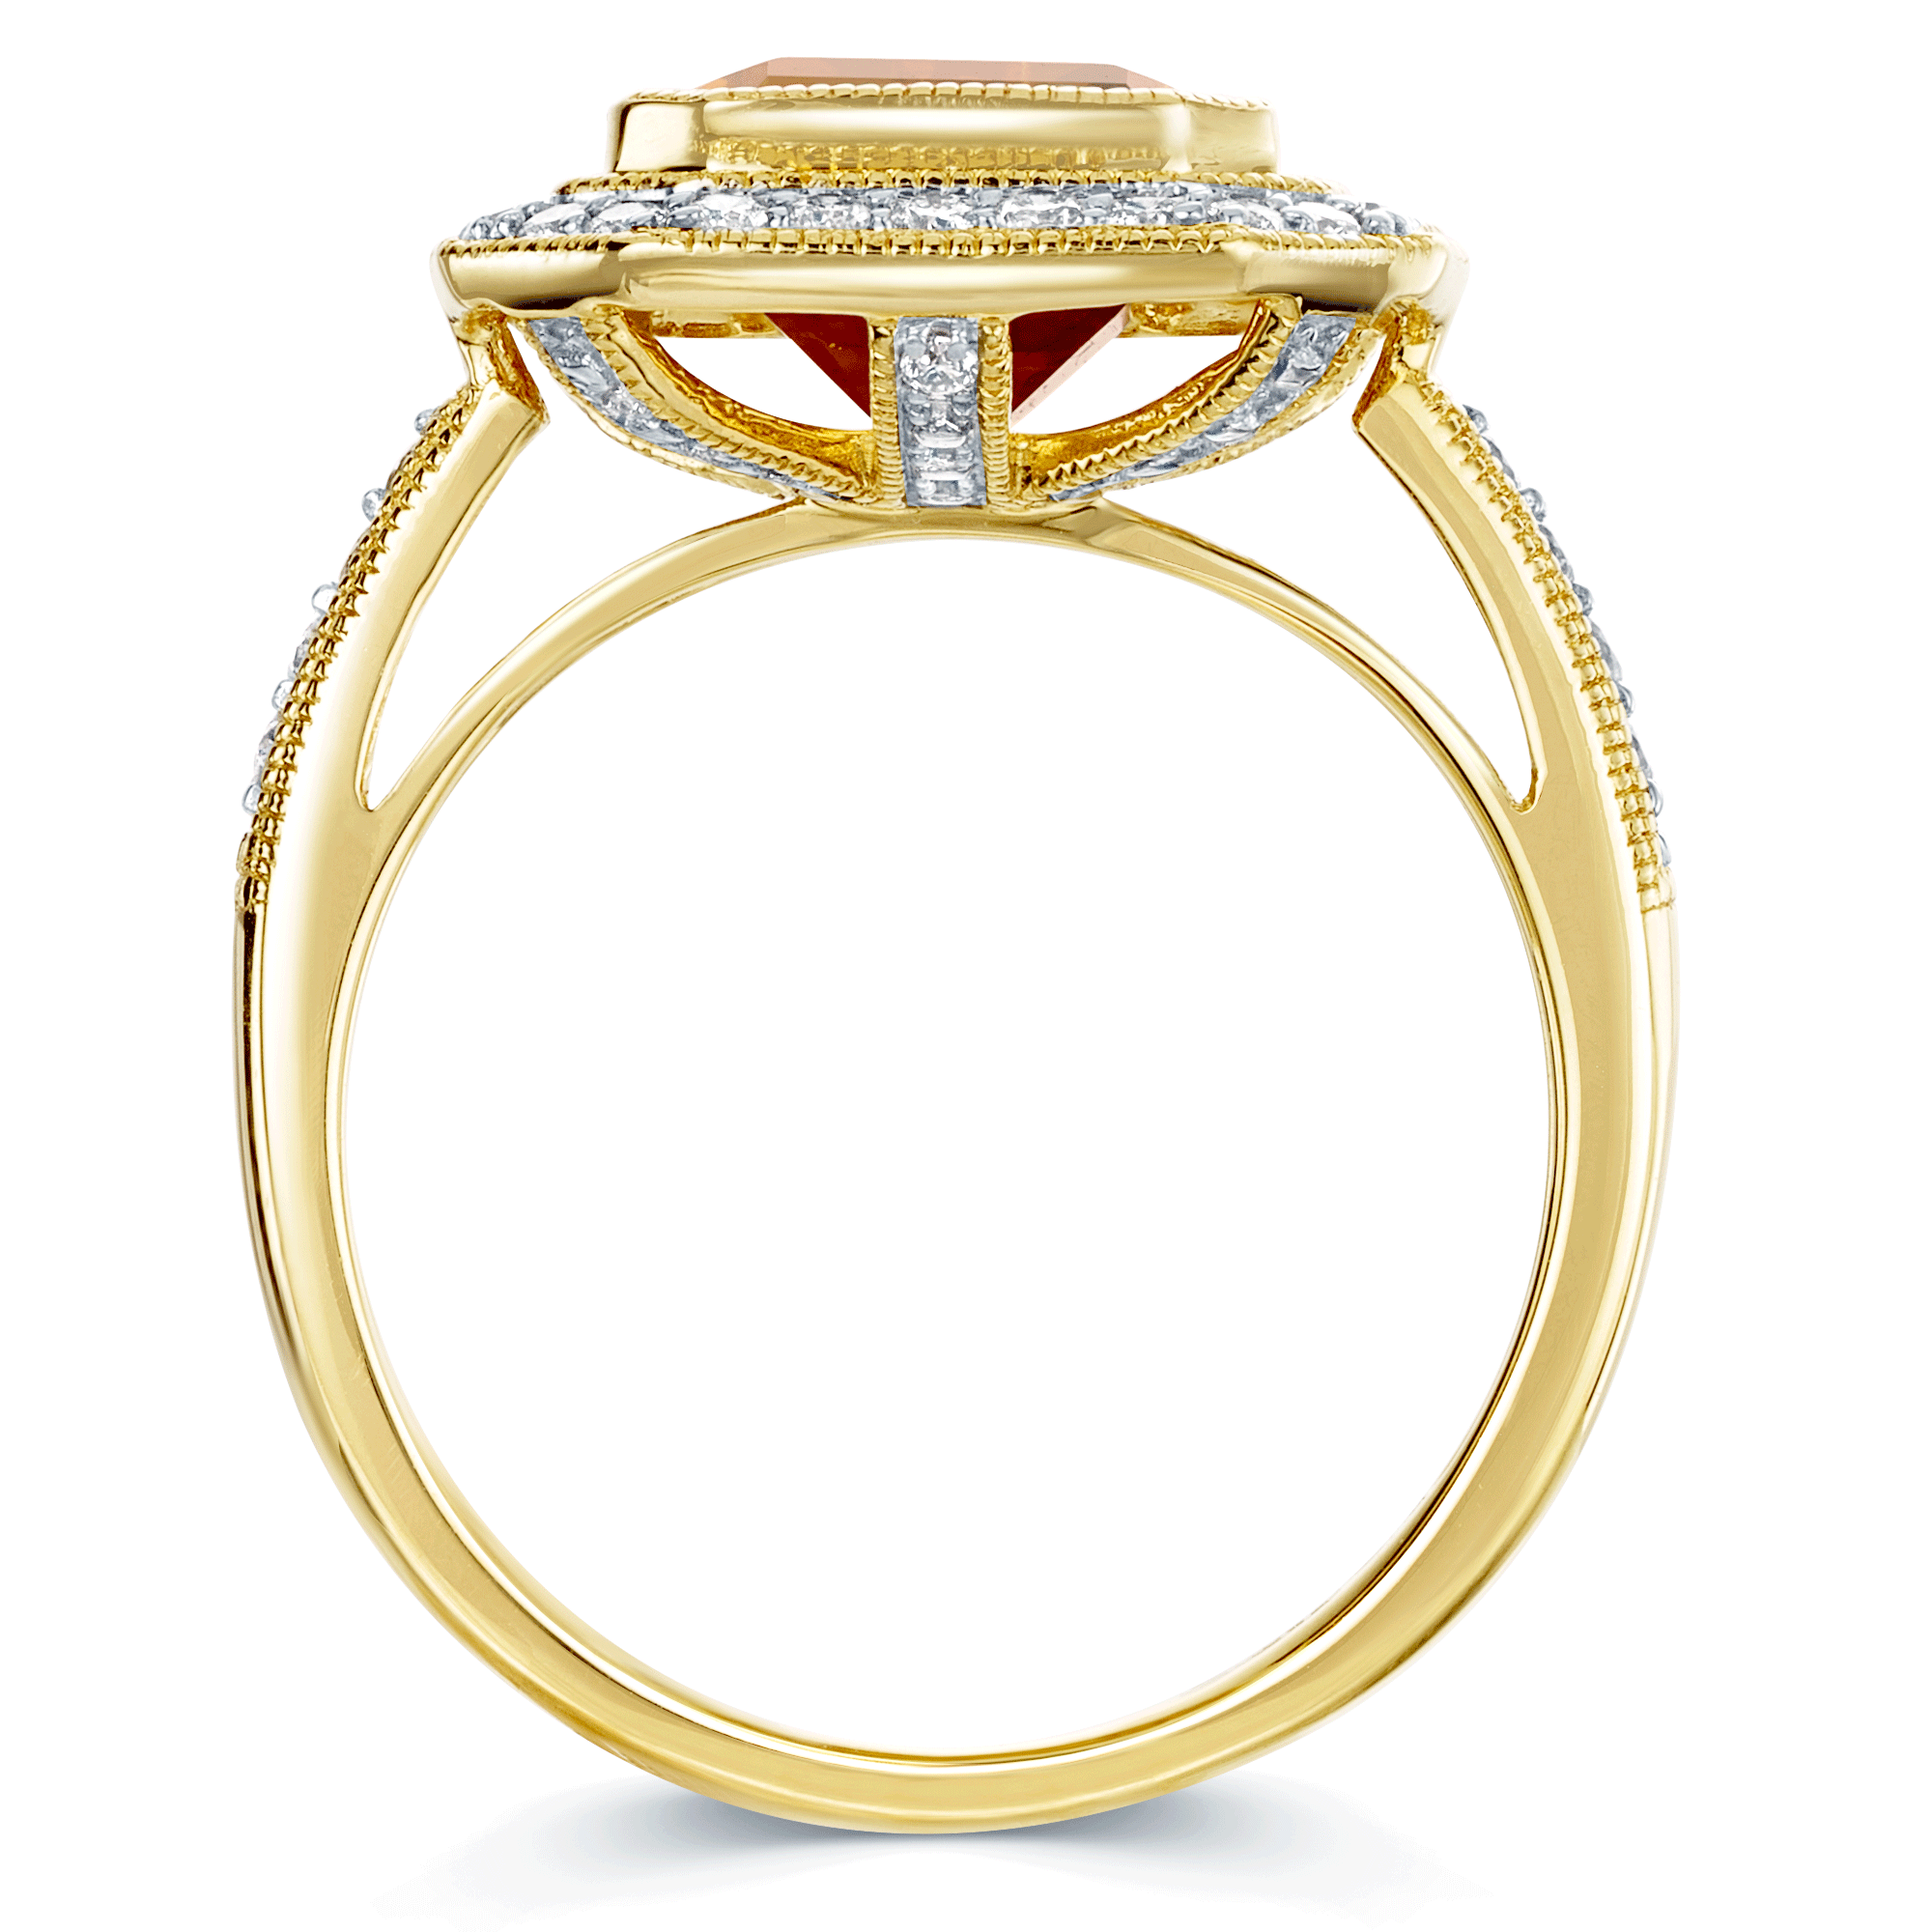 18ct Yellow Gold Citrine And Diamond Halo Set Ring With Diamond Set Shoulders